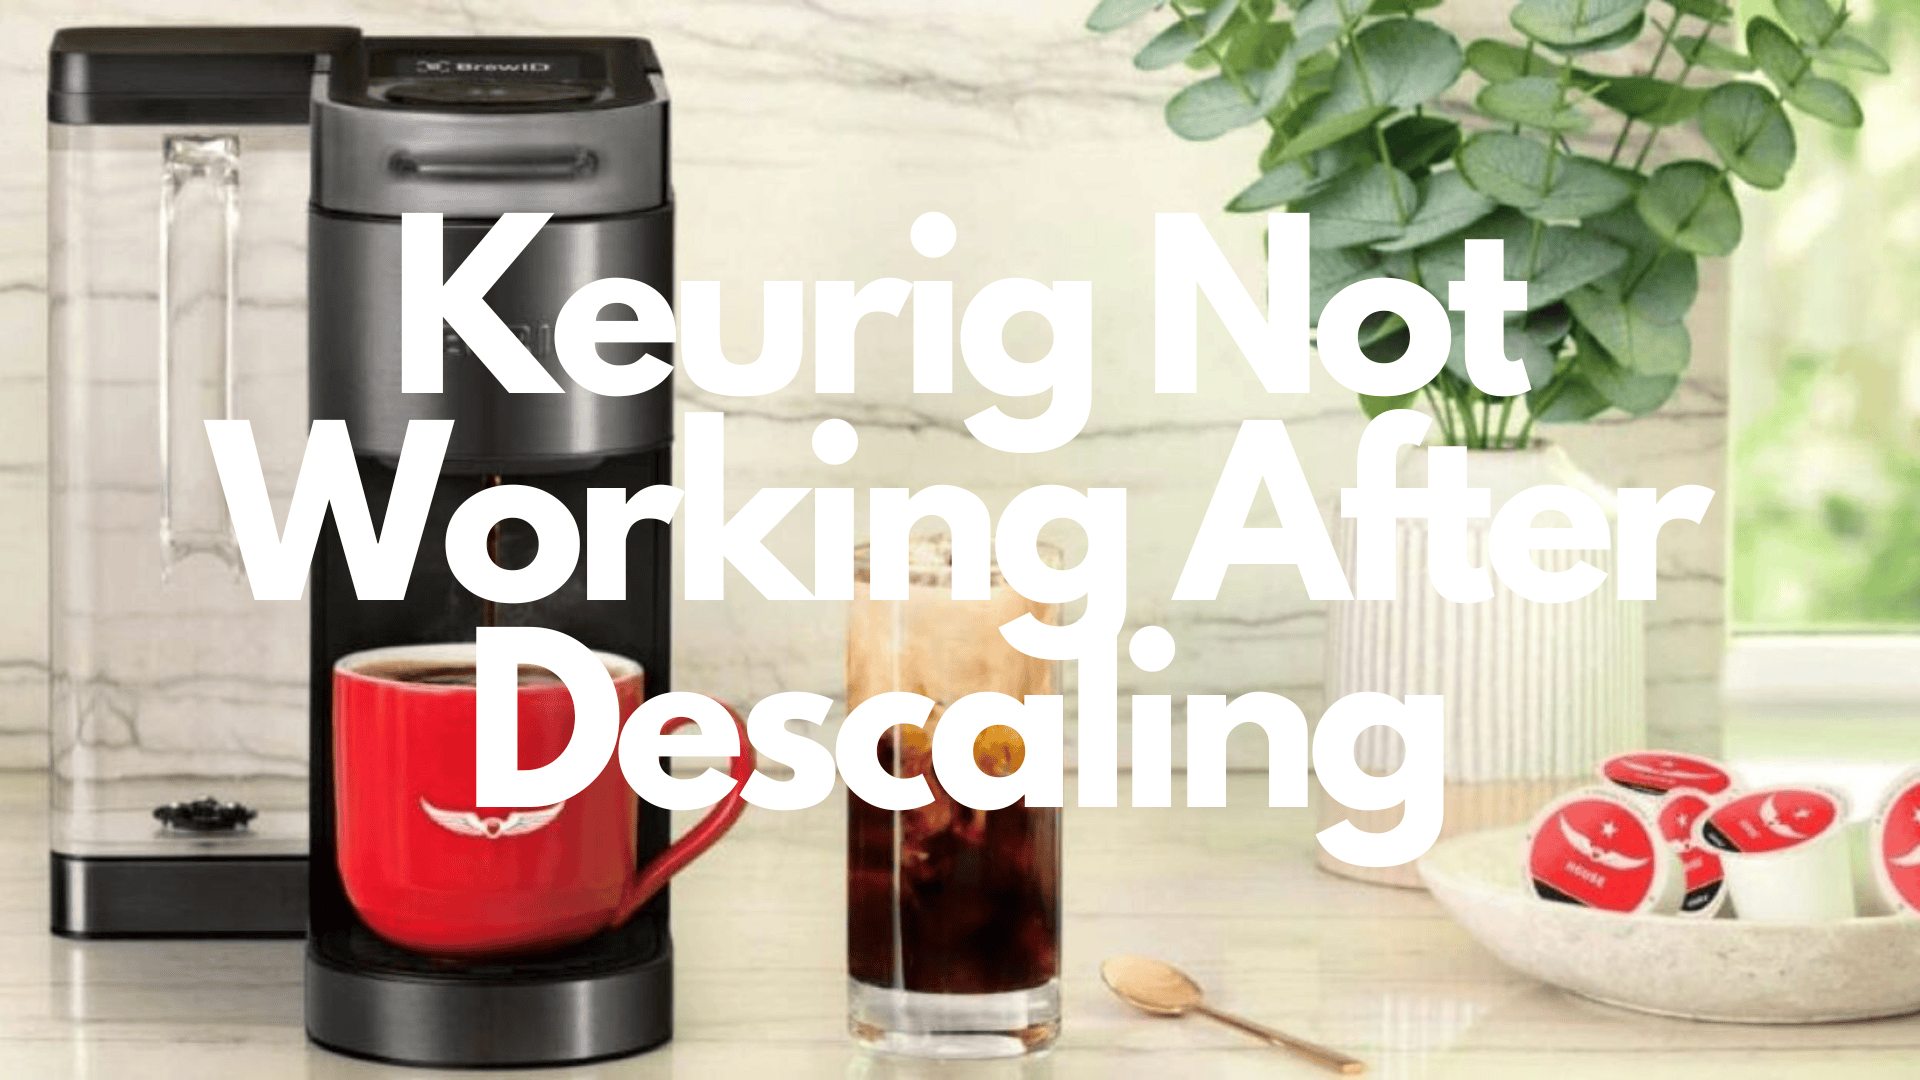 Yet Another Reason to Covet a Keurig